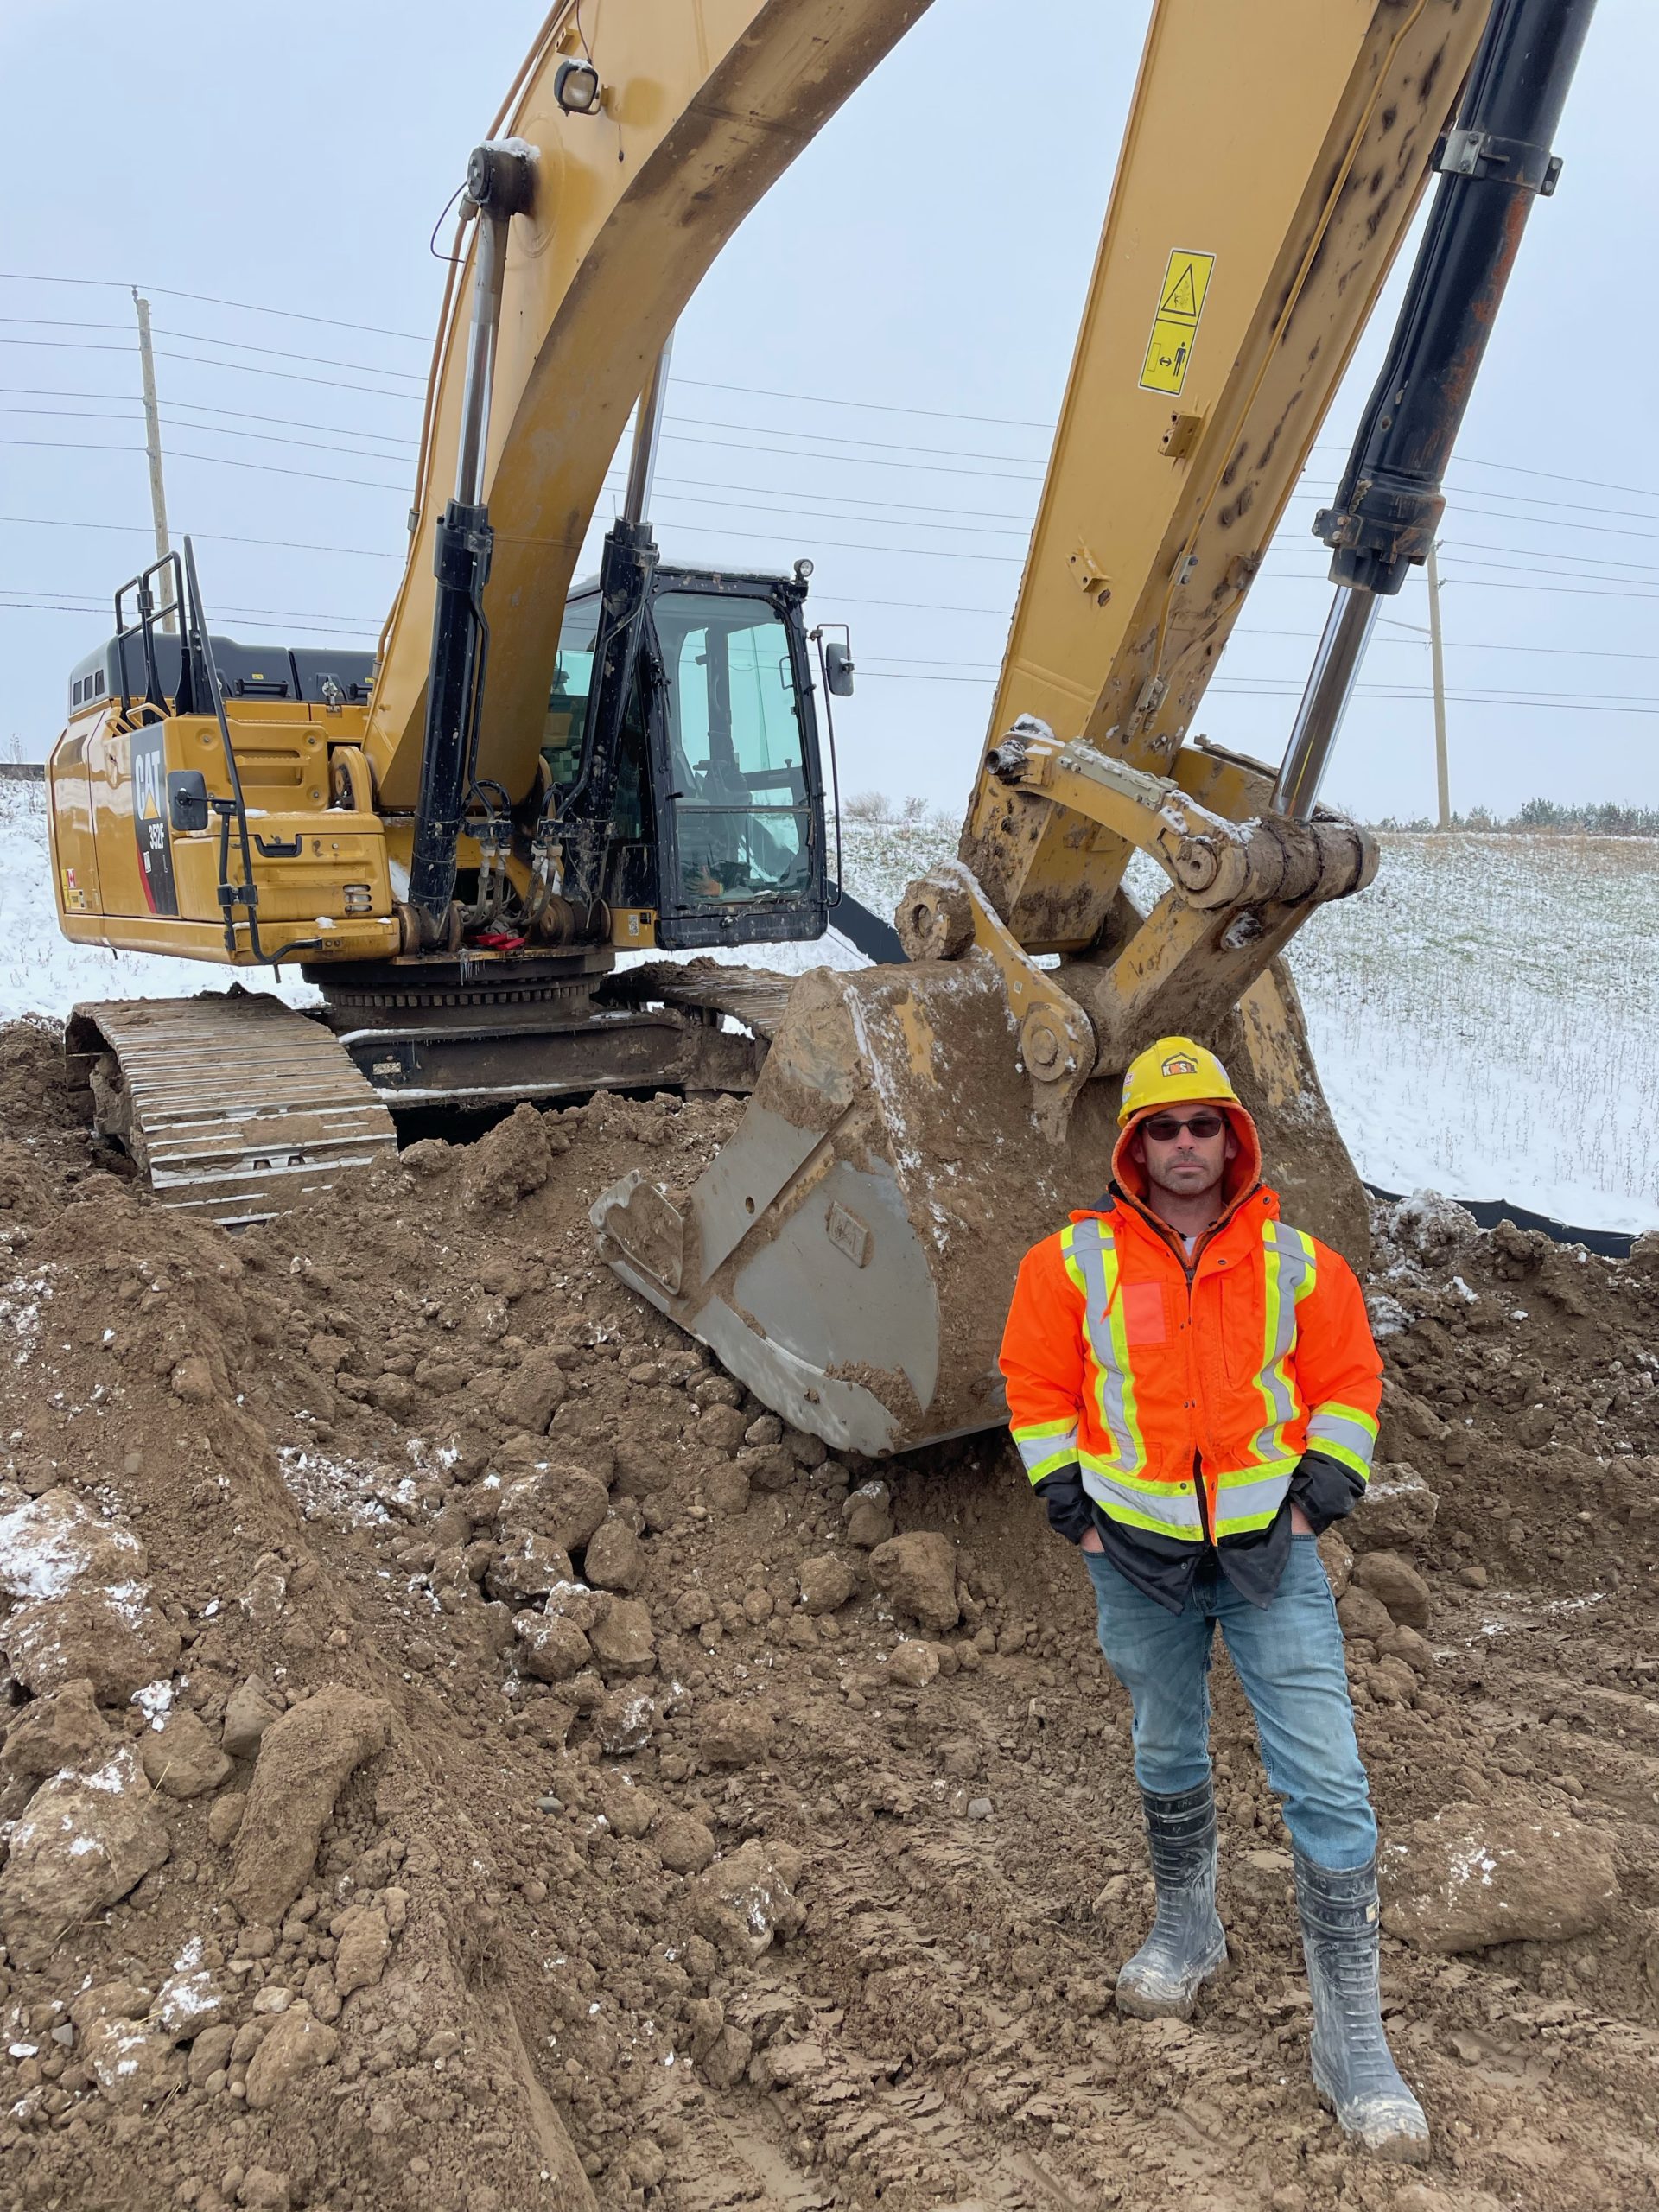 Local 793 member Robbie Evans standing in front of a 352F excavator.